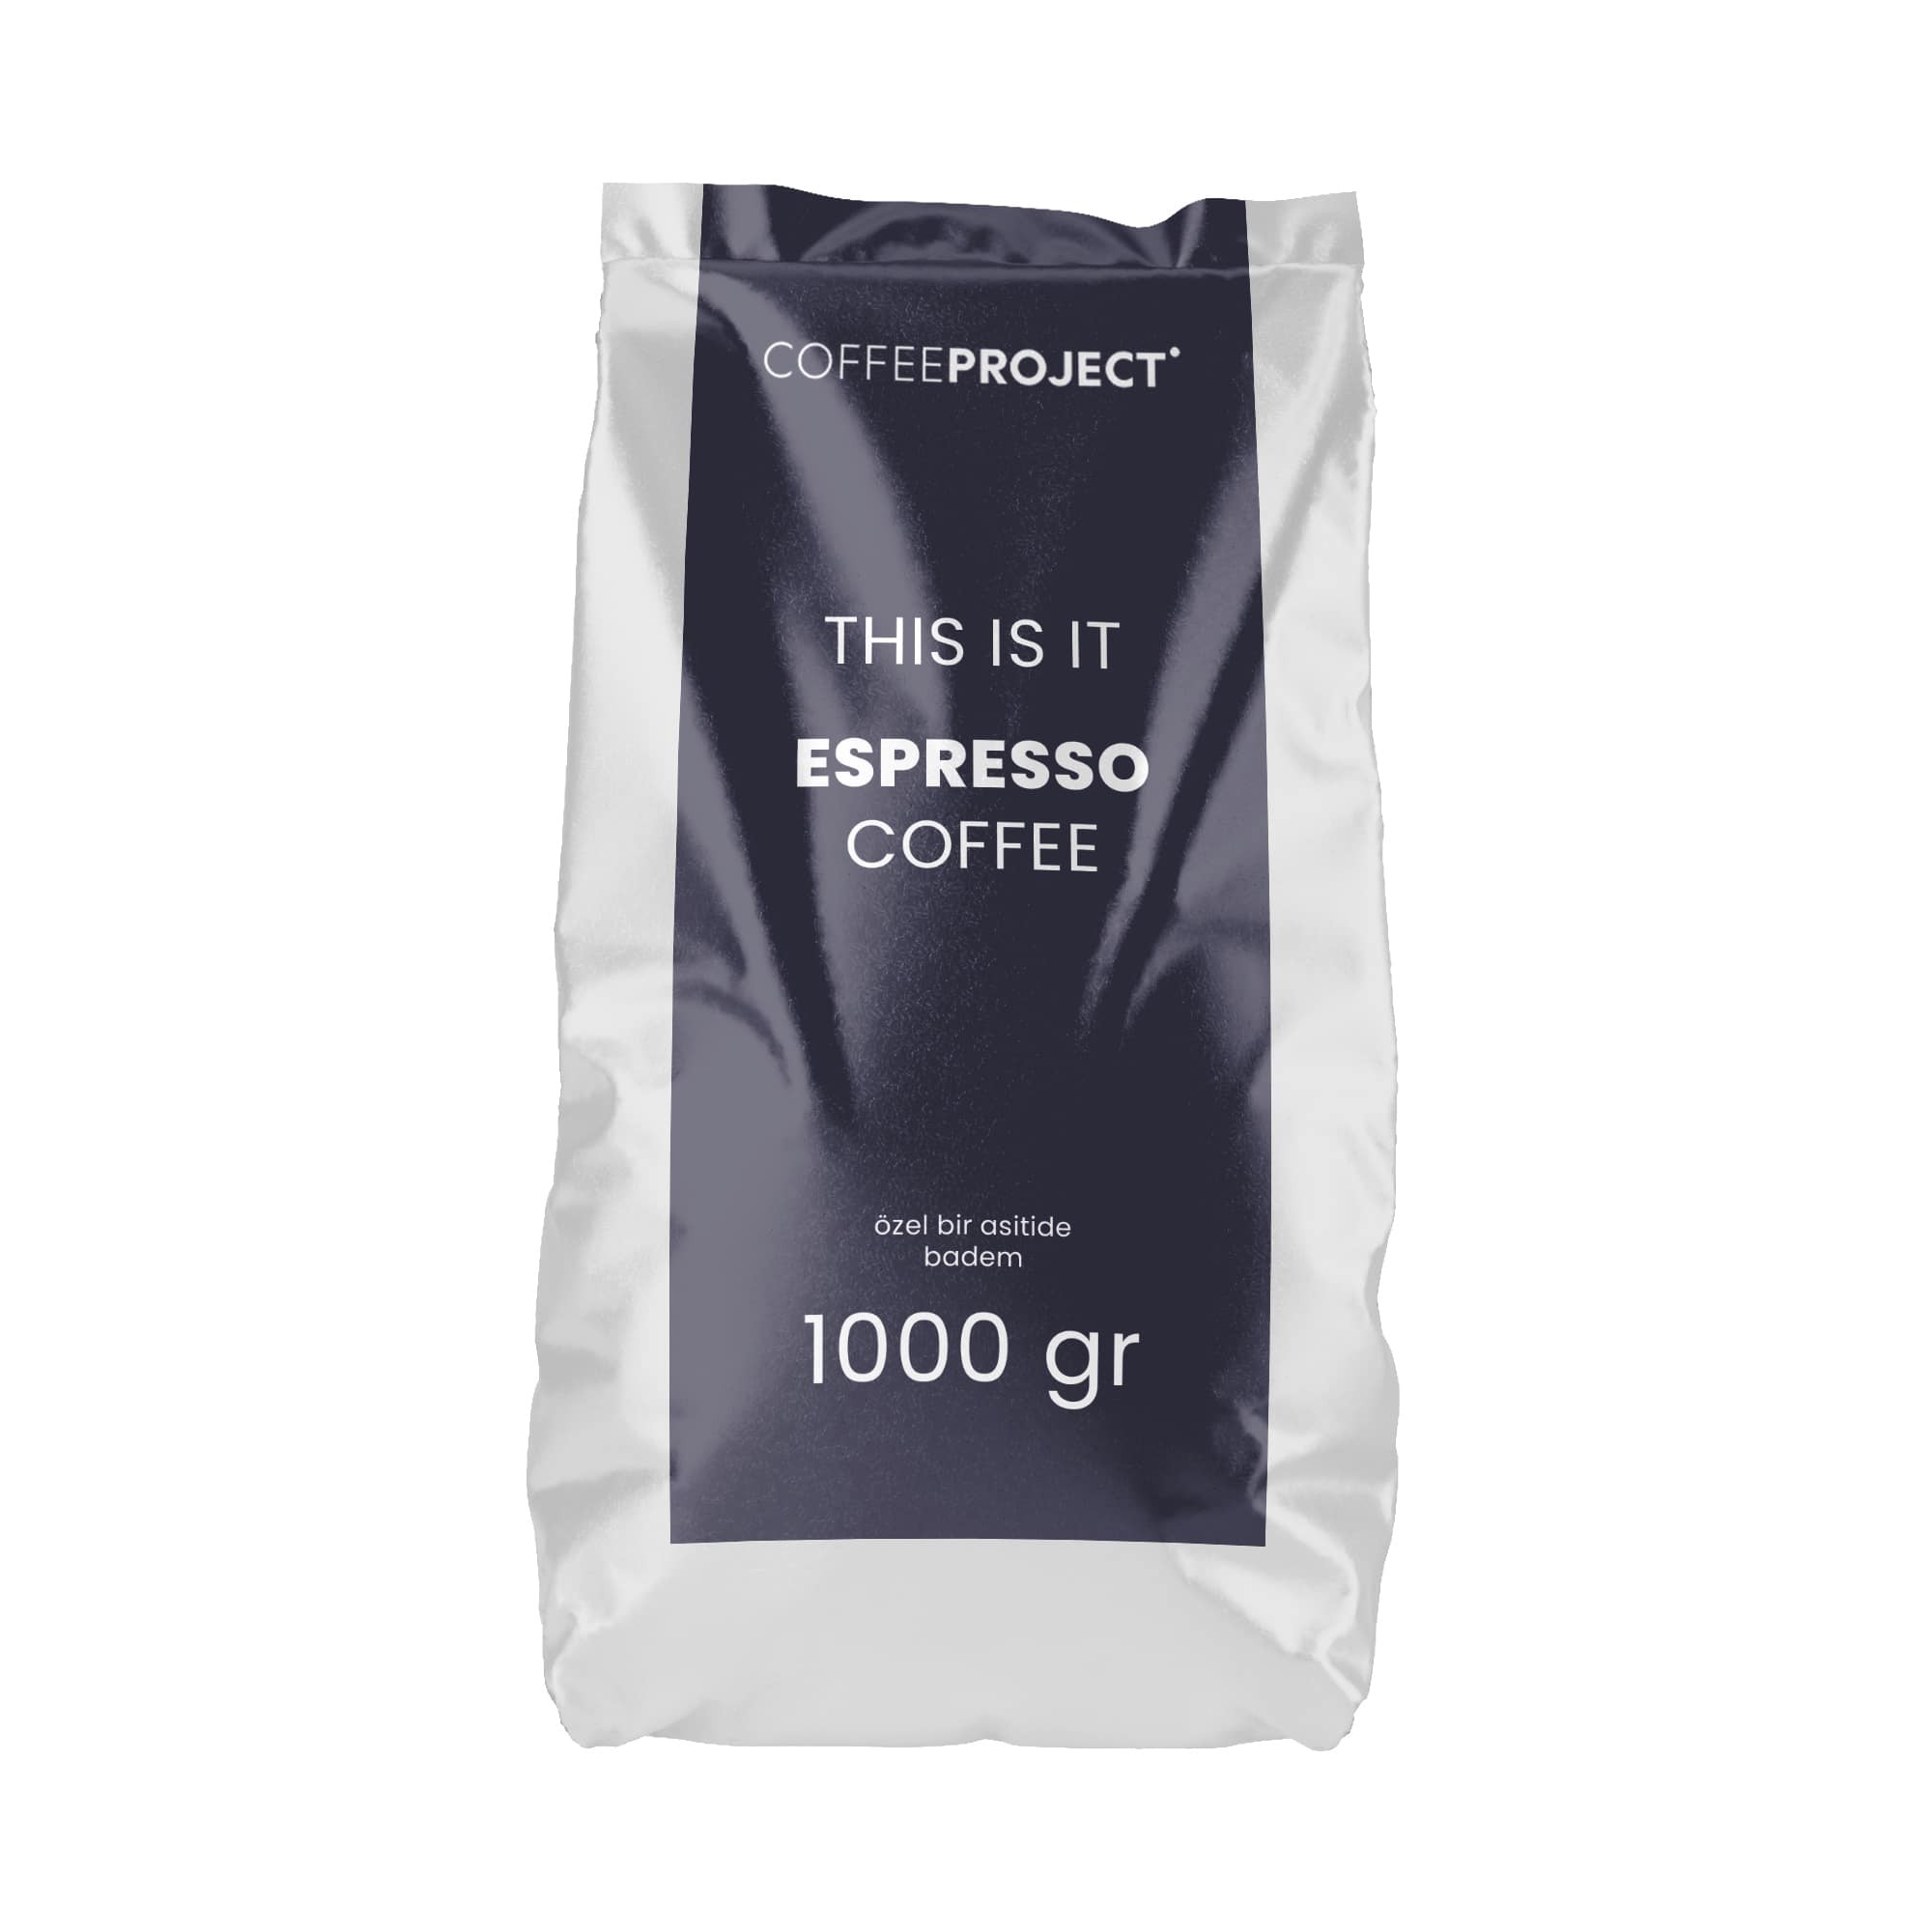 1 kg Espresso Coffee - This is it